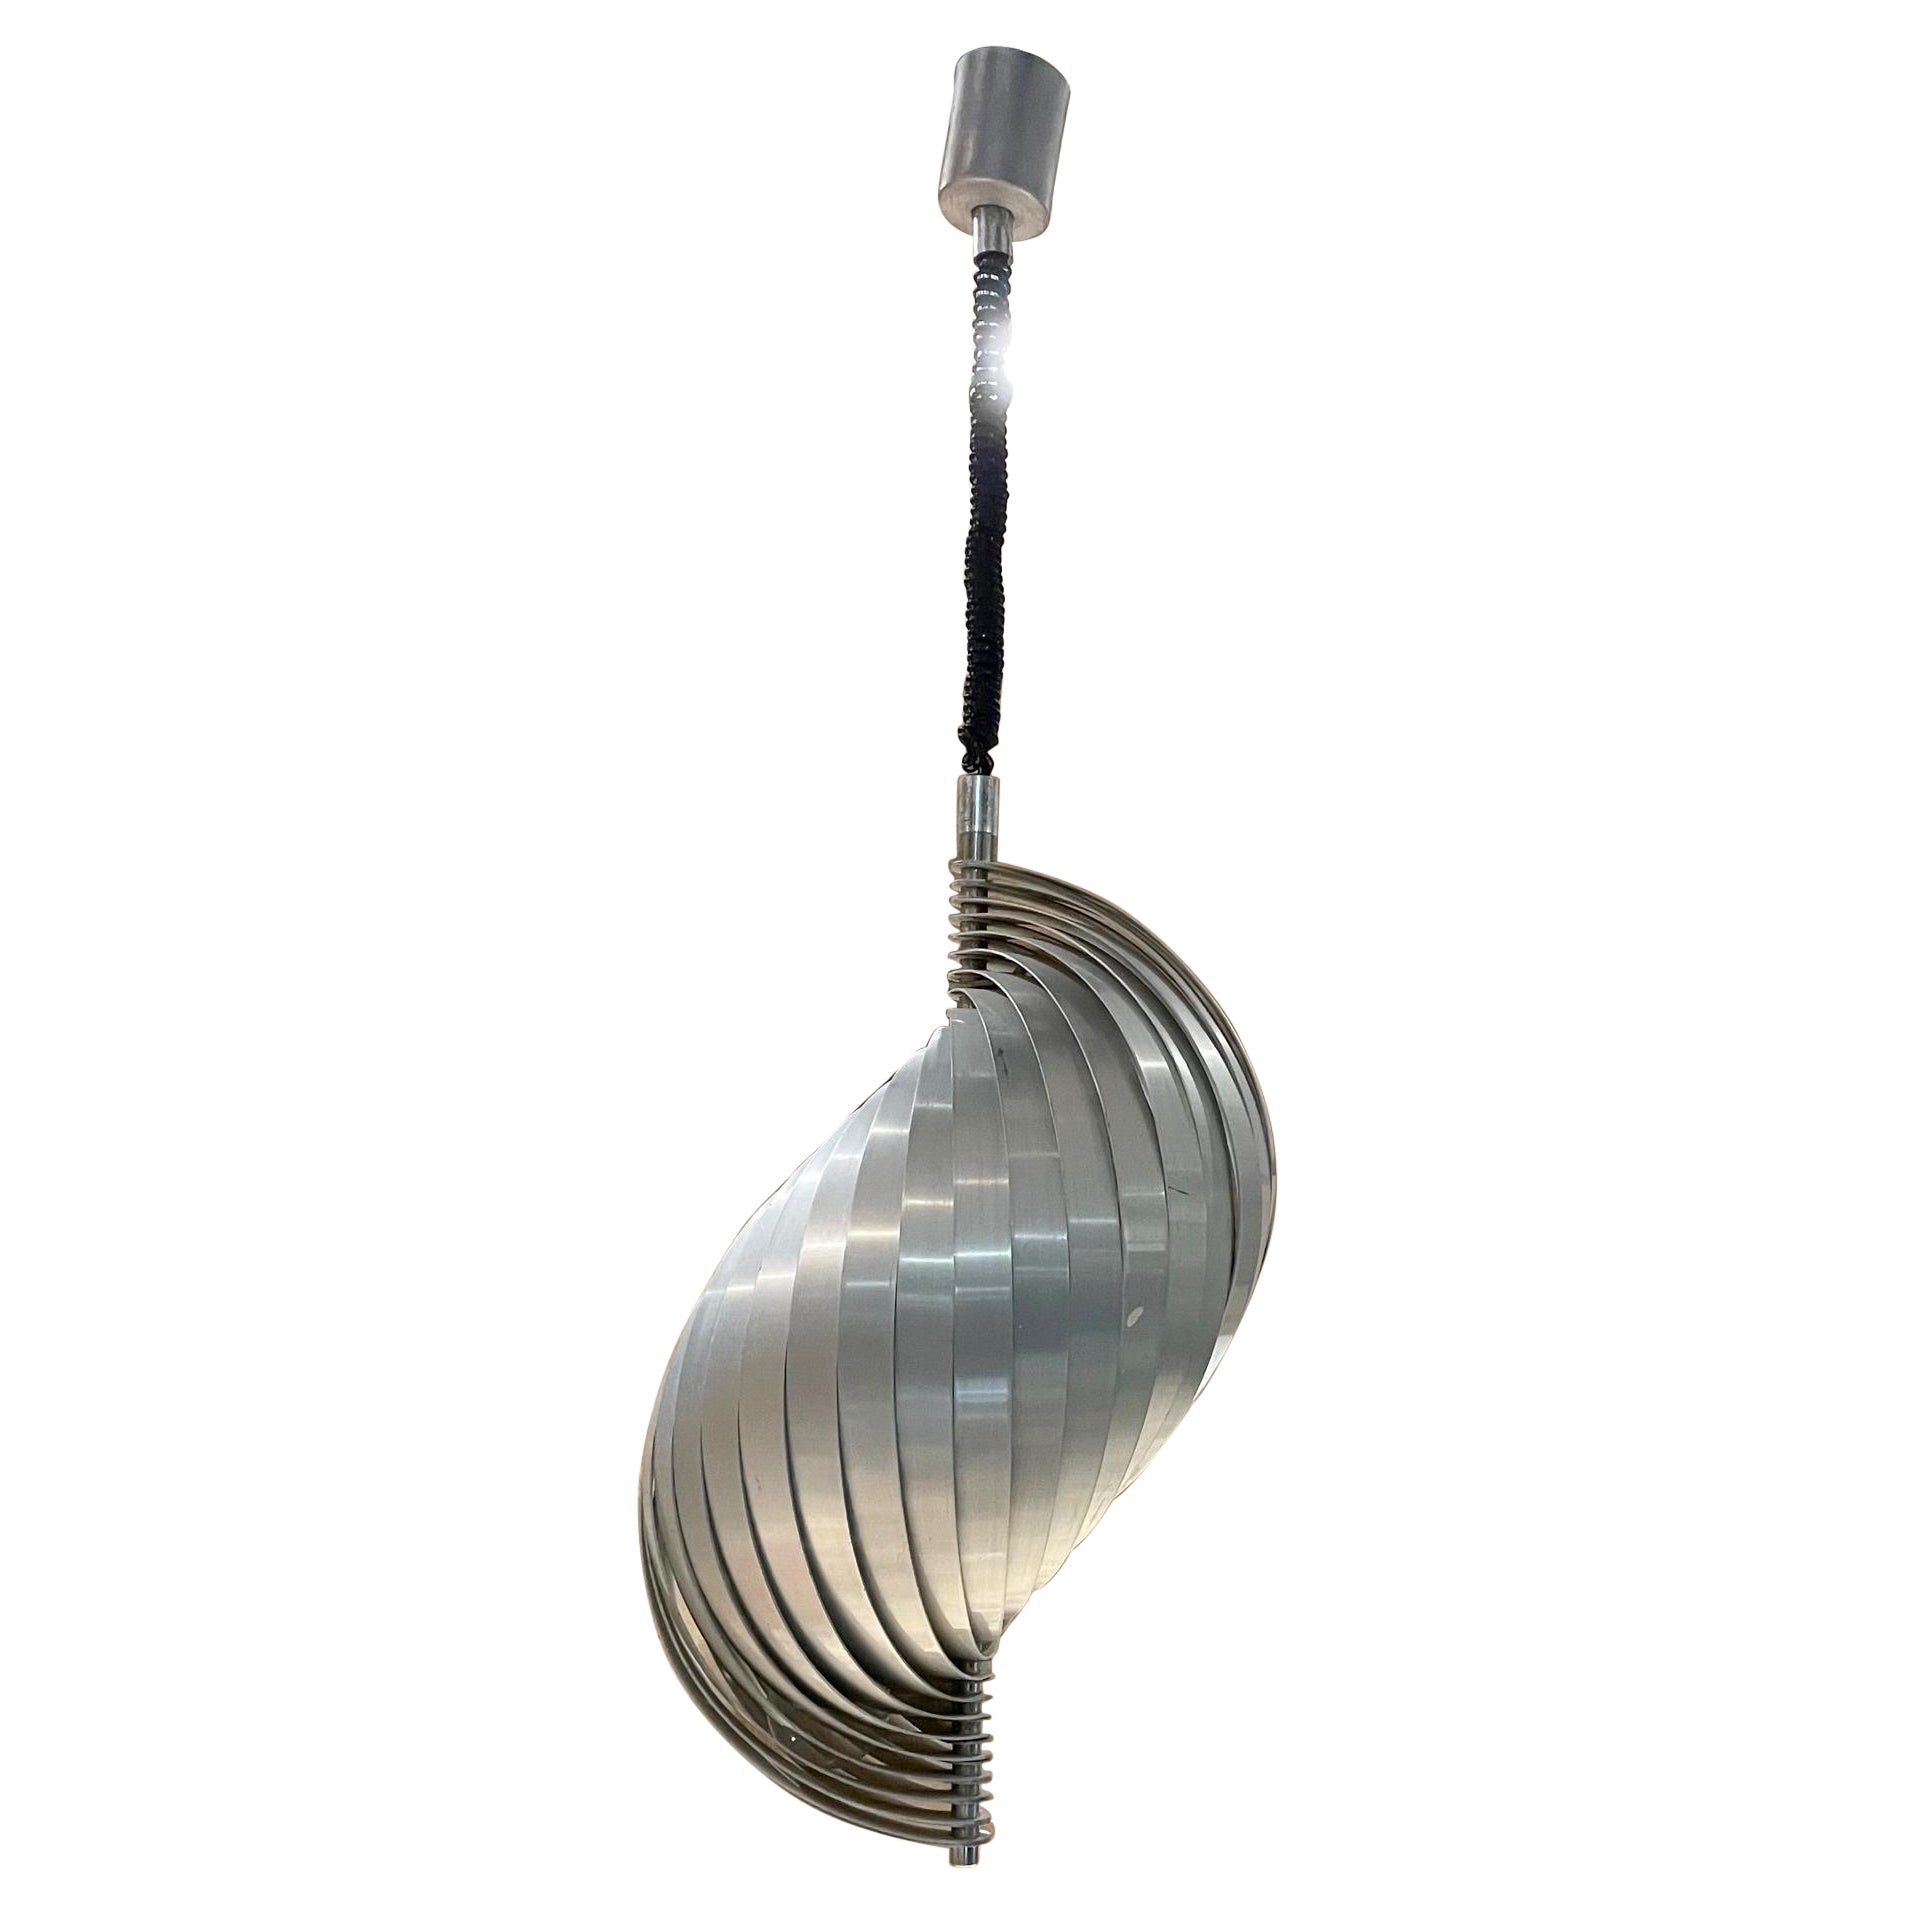 Ceiling pendant lamp
Spiral French twist ceiling lamp pendant light in aluminum by Henri Mathieu, 1970s, France
Aluminum Space Age sheets form a sculptural 